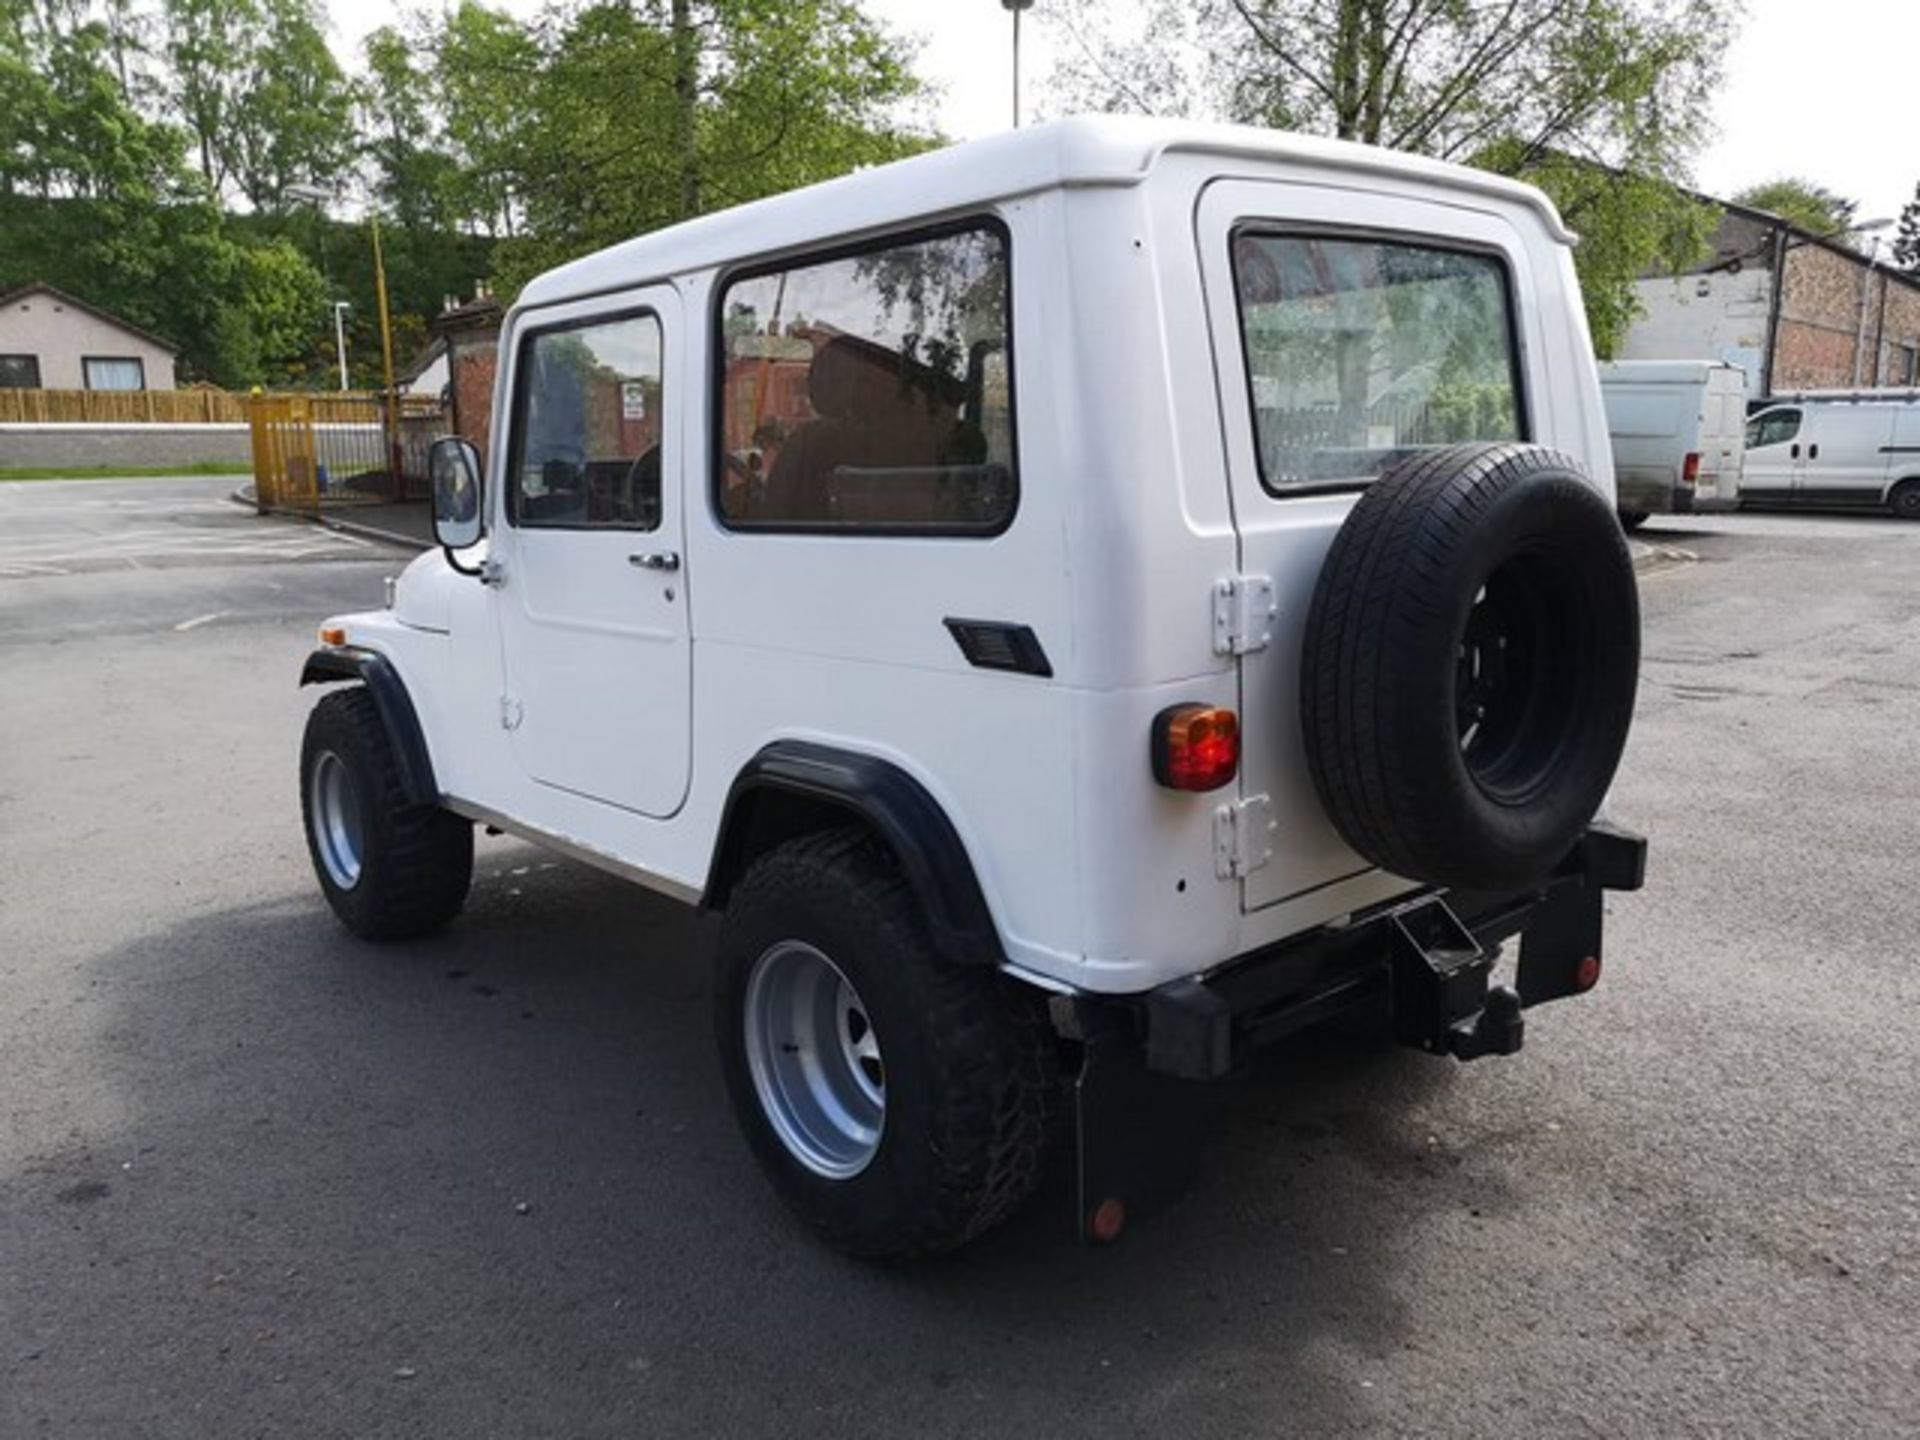 SSANG YONG KORANDO CJ-7 - Norweigan Import declared manufactured 1988 to be fully UK registered prio - Image 2 of 7